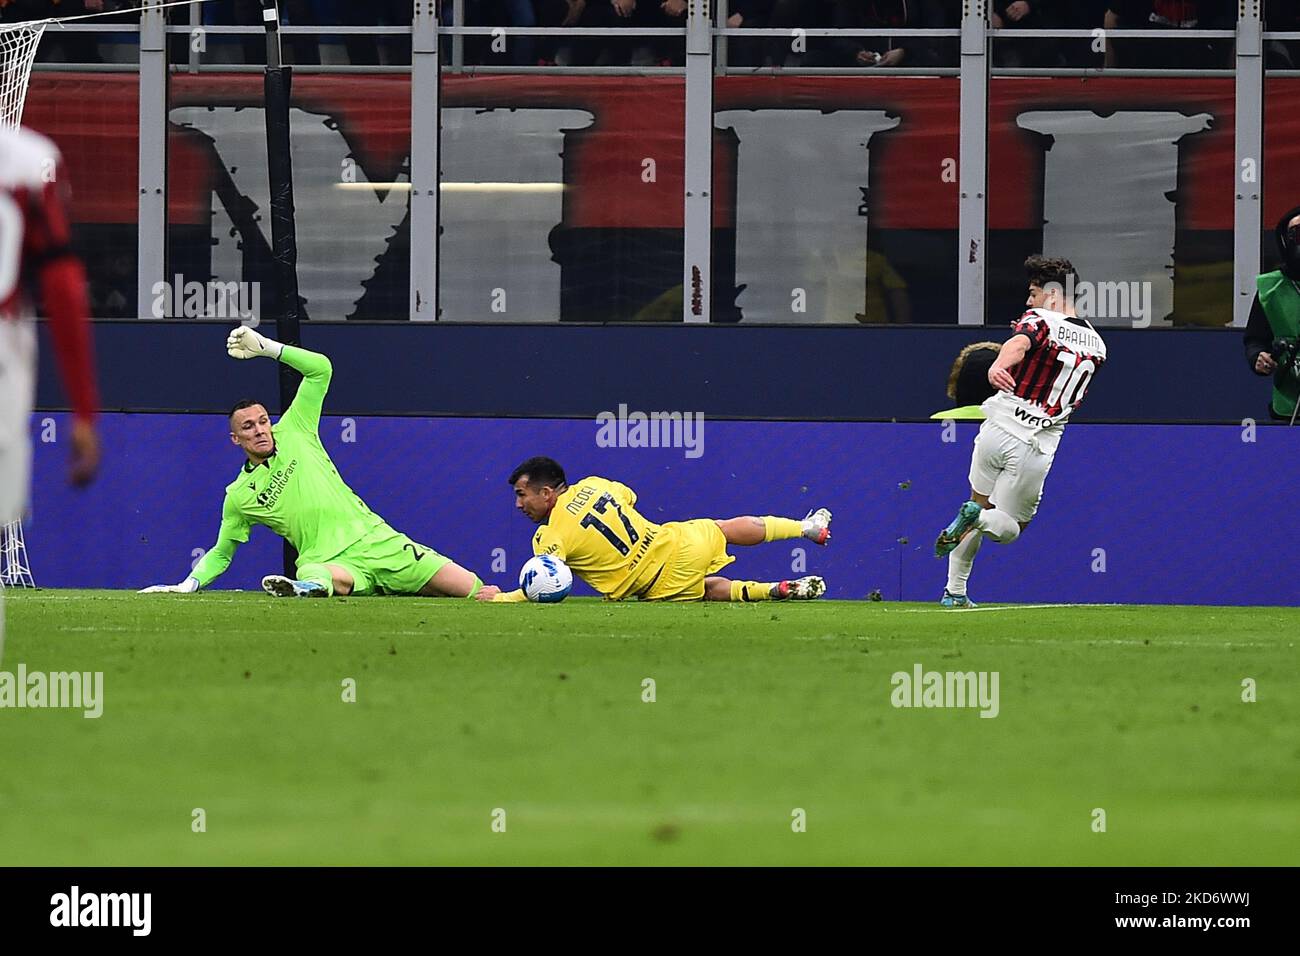 Gary Medel of Bologna F.C. saves the shot of Brahim Diaz of A.C. Milan during the Italian Serie A soccer match between A.C. Milan vs Bologna F.C. at the San Siro Stadium in Milan, Italy on 4 April 2022. (Photo by Michele Maraviglia/NurPhoto) Stock Photo